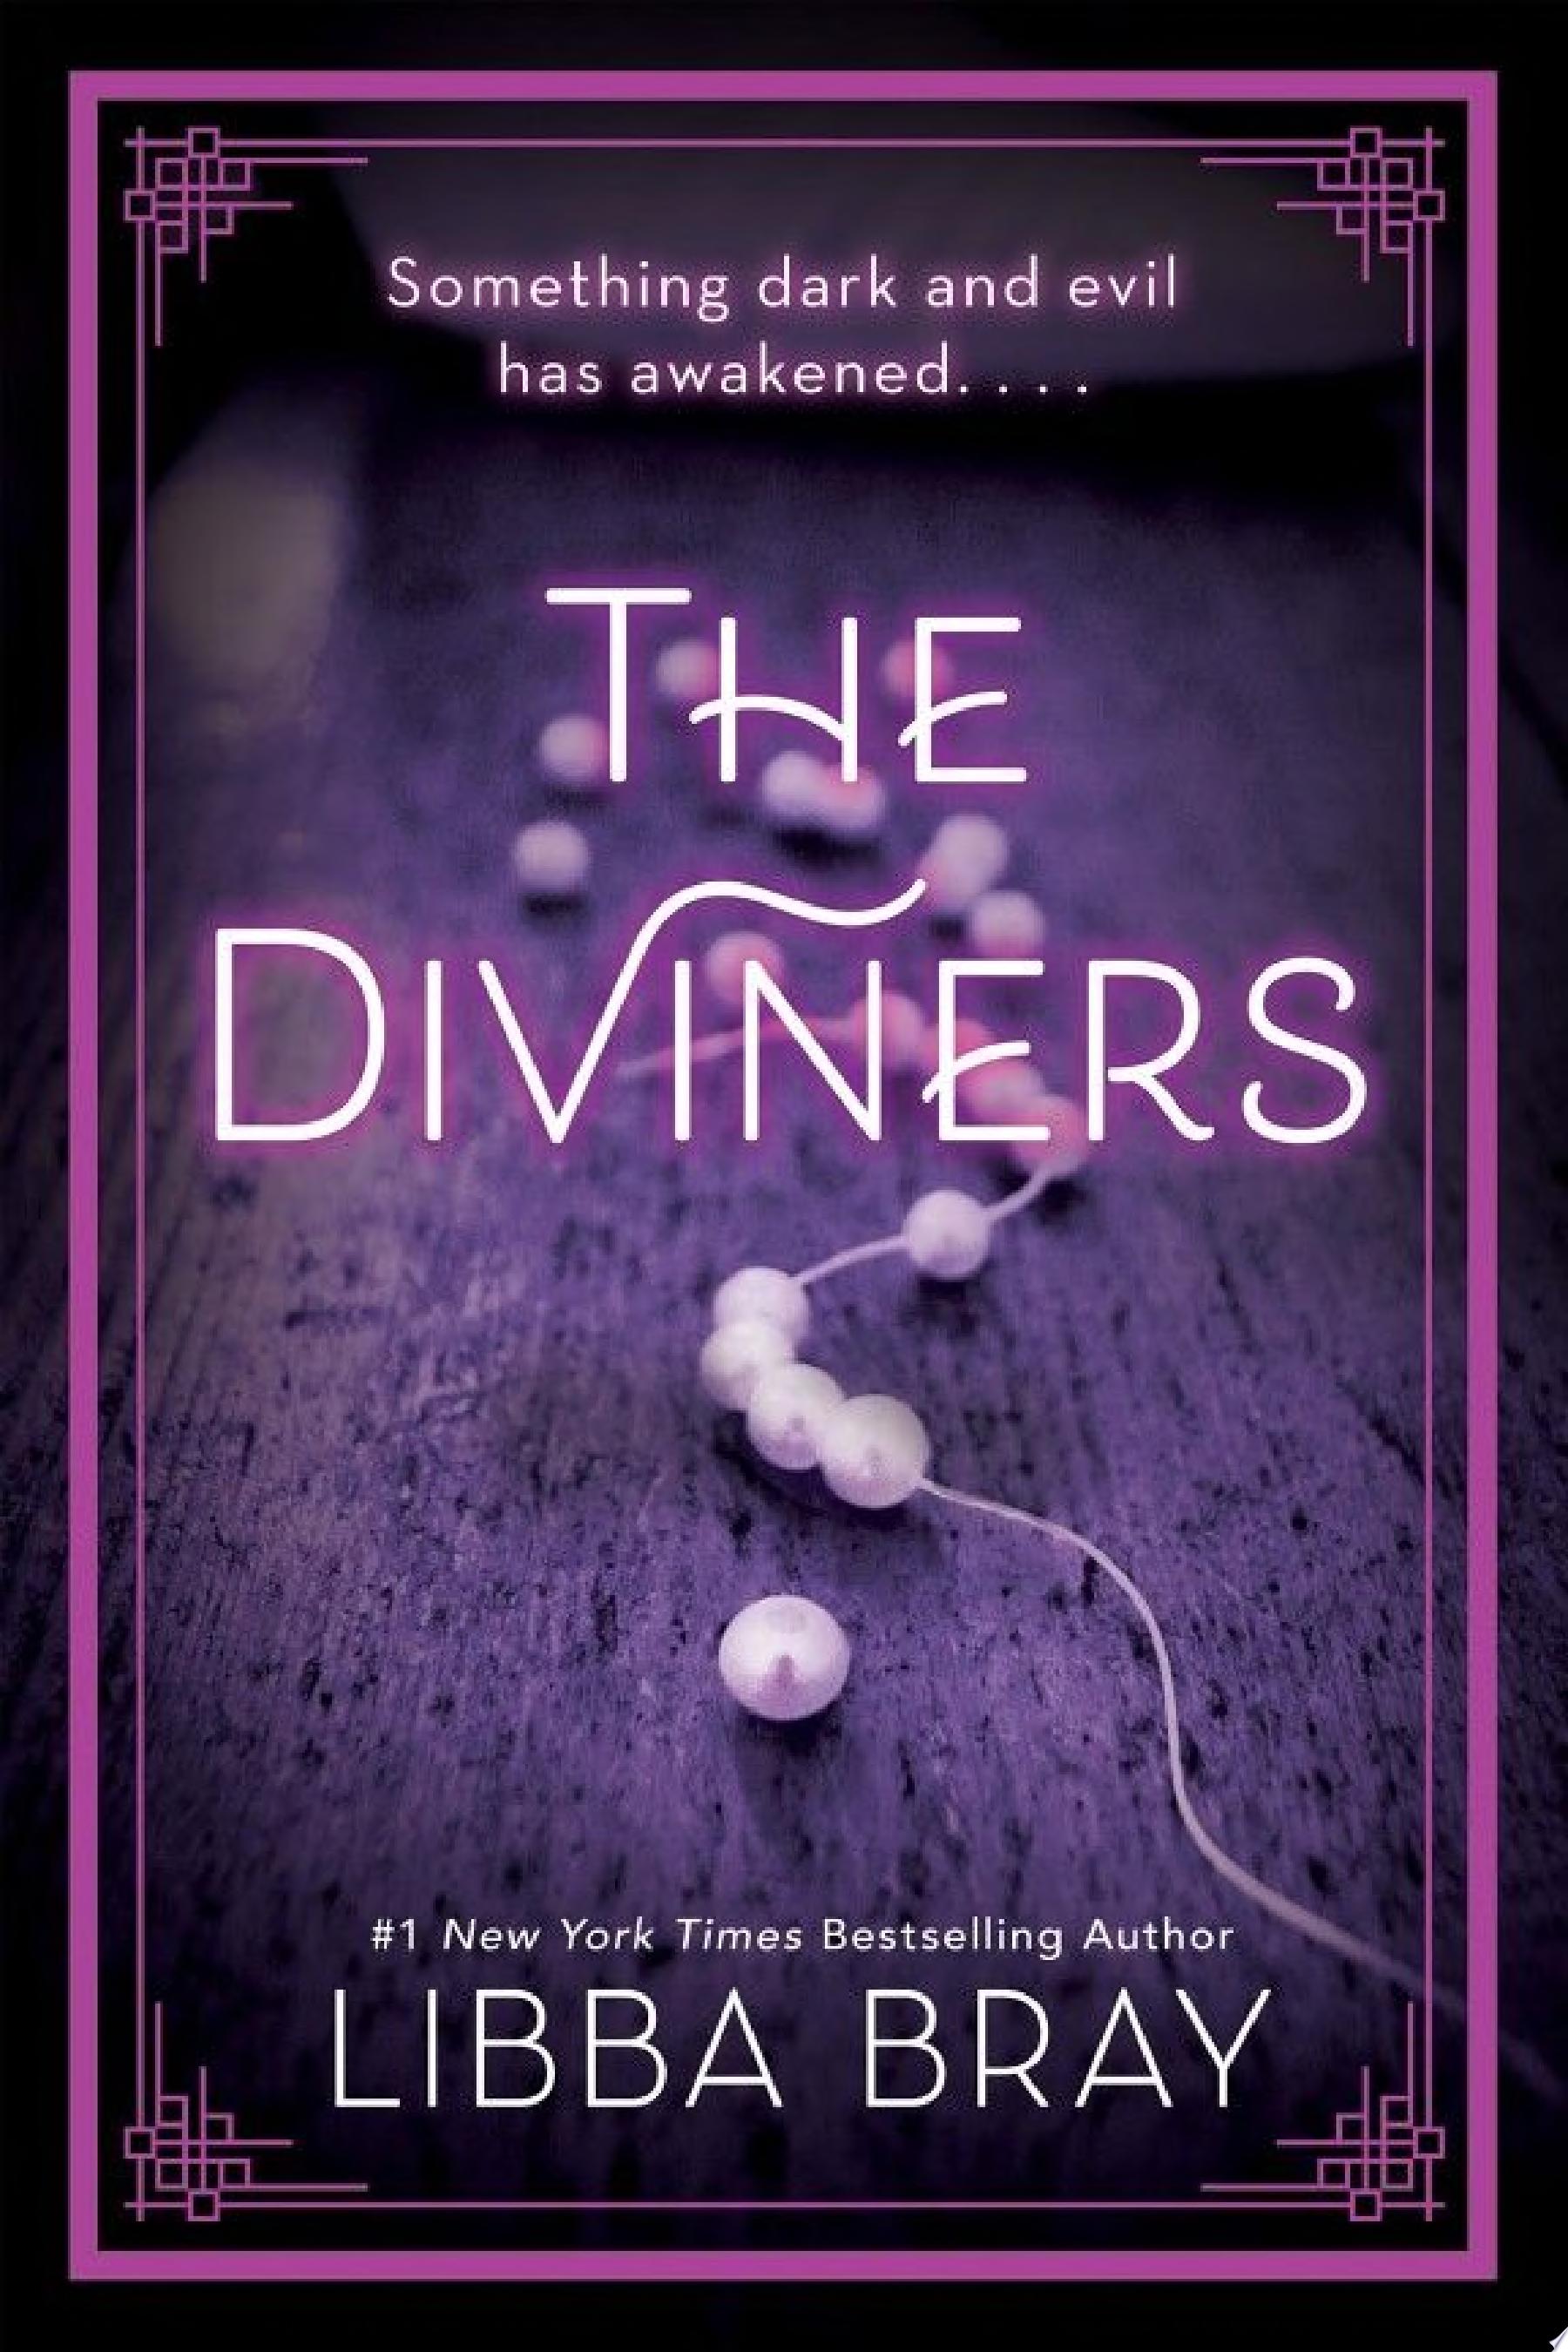 Image for "The Diviners"